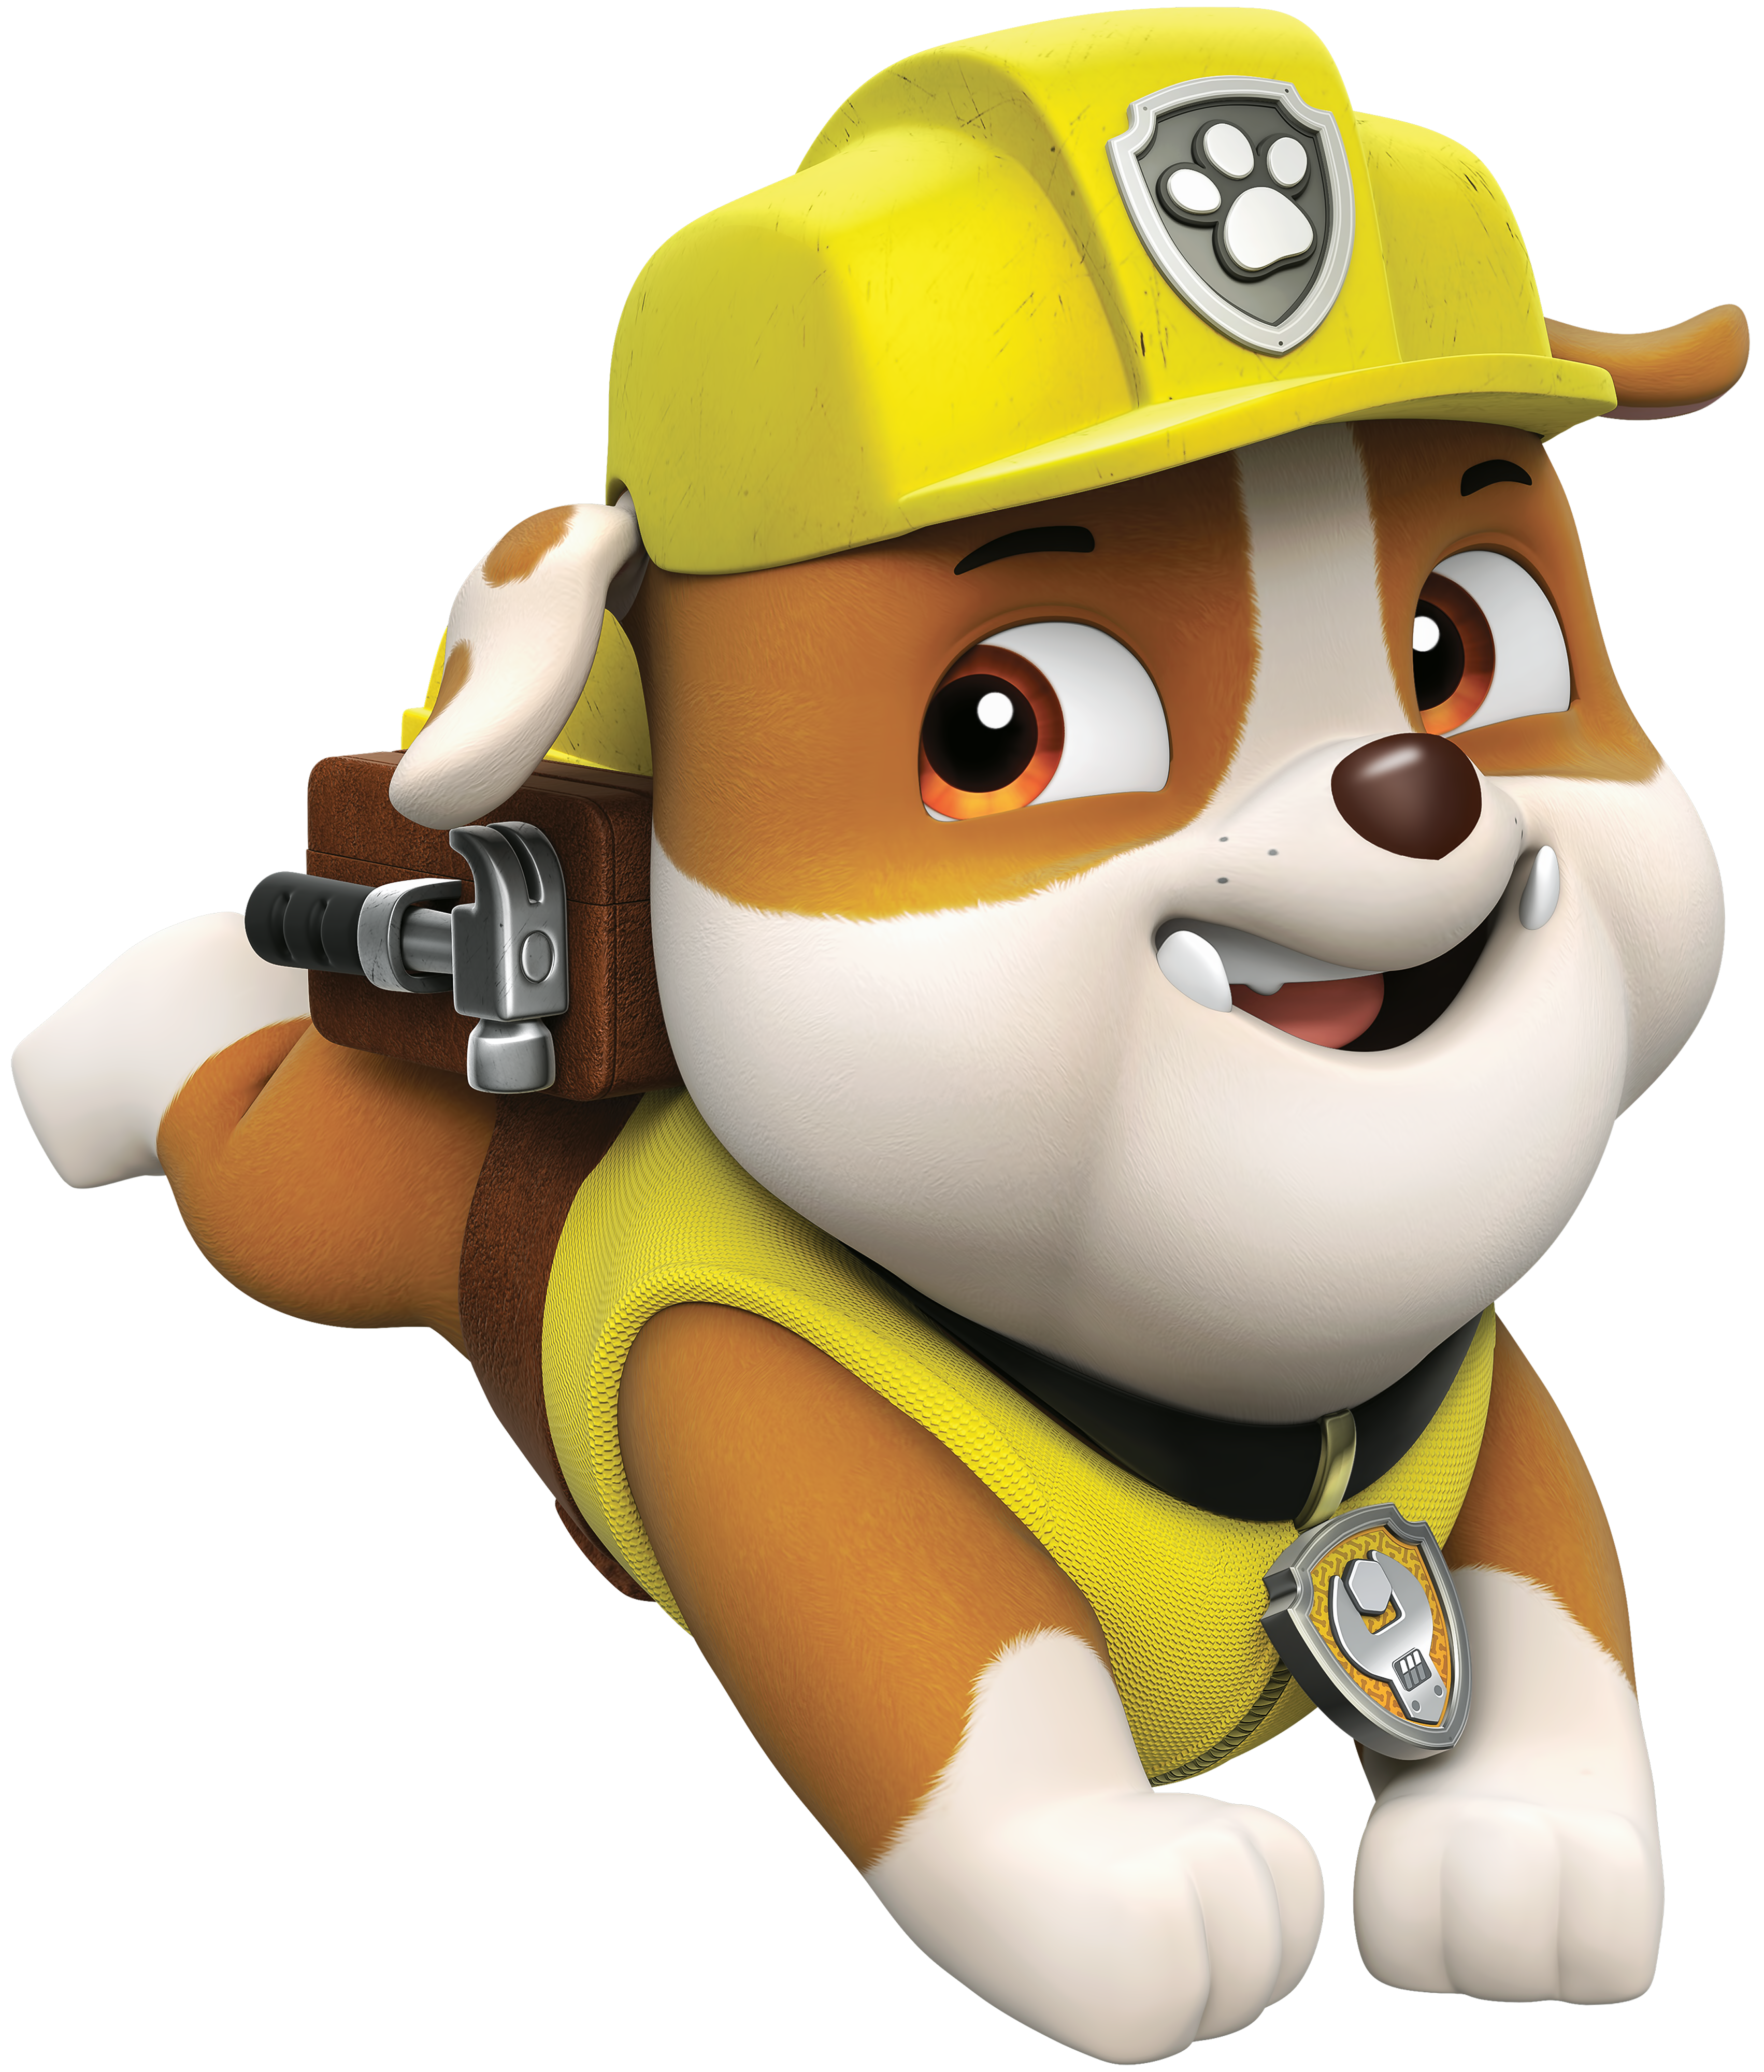 PAW Patrol Rubble PNG Cartoon Image ...gallery.yopriceville.